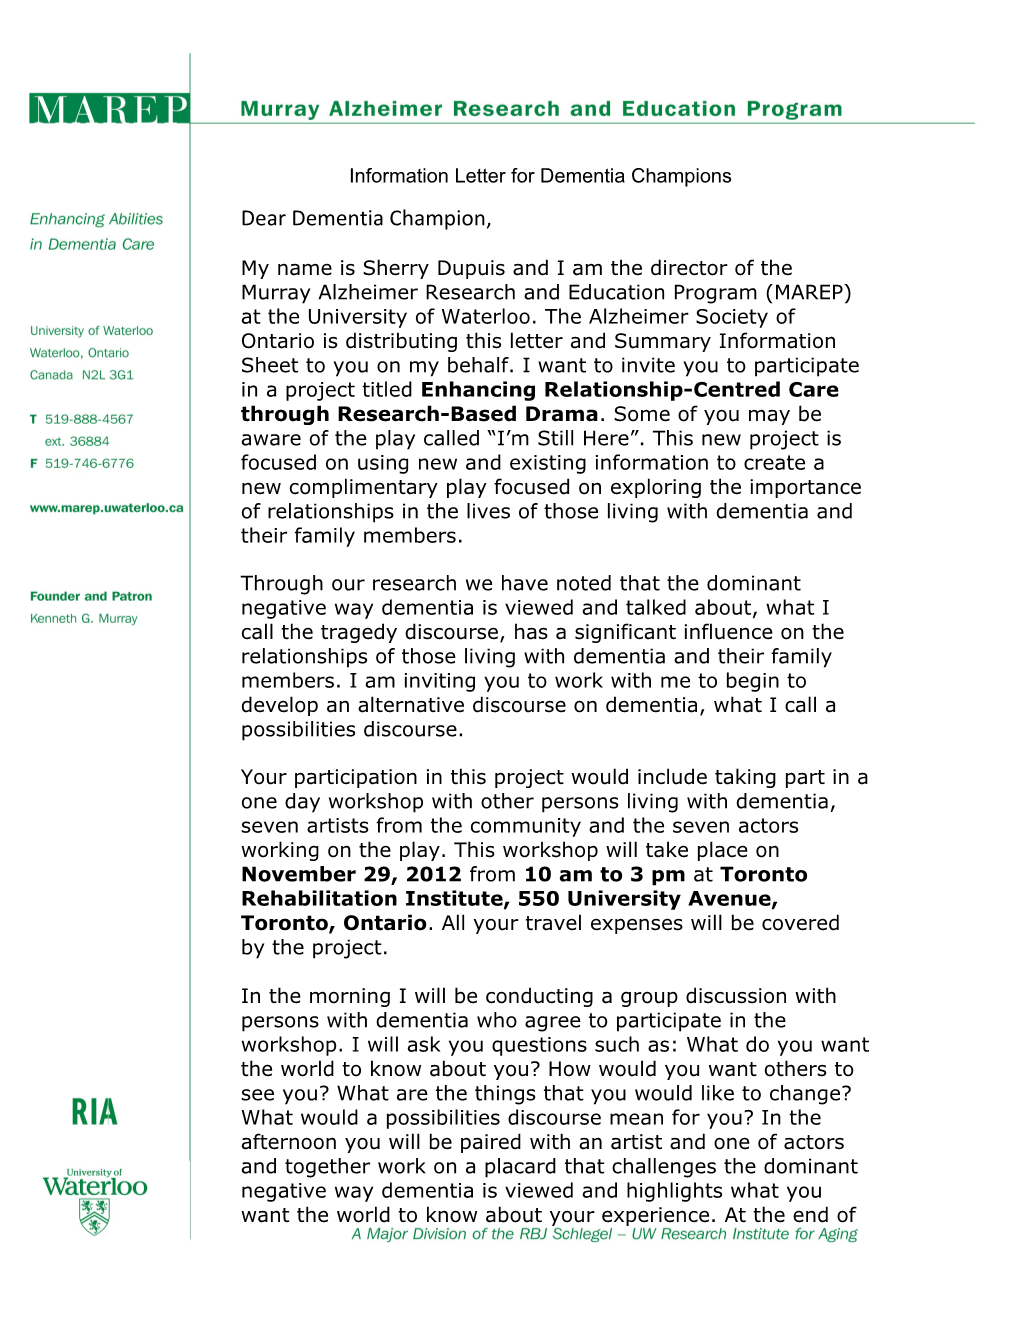 Information Letter for Dementia Champions